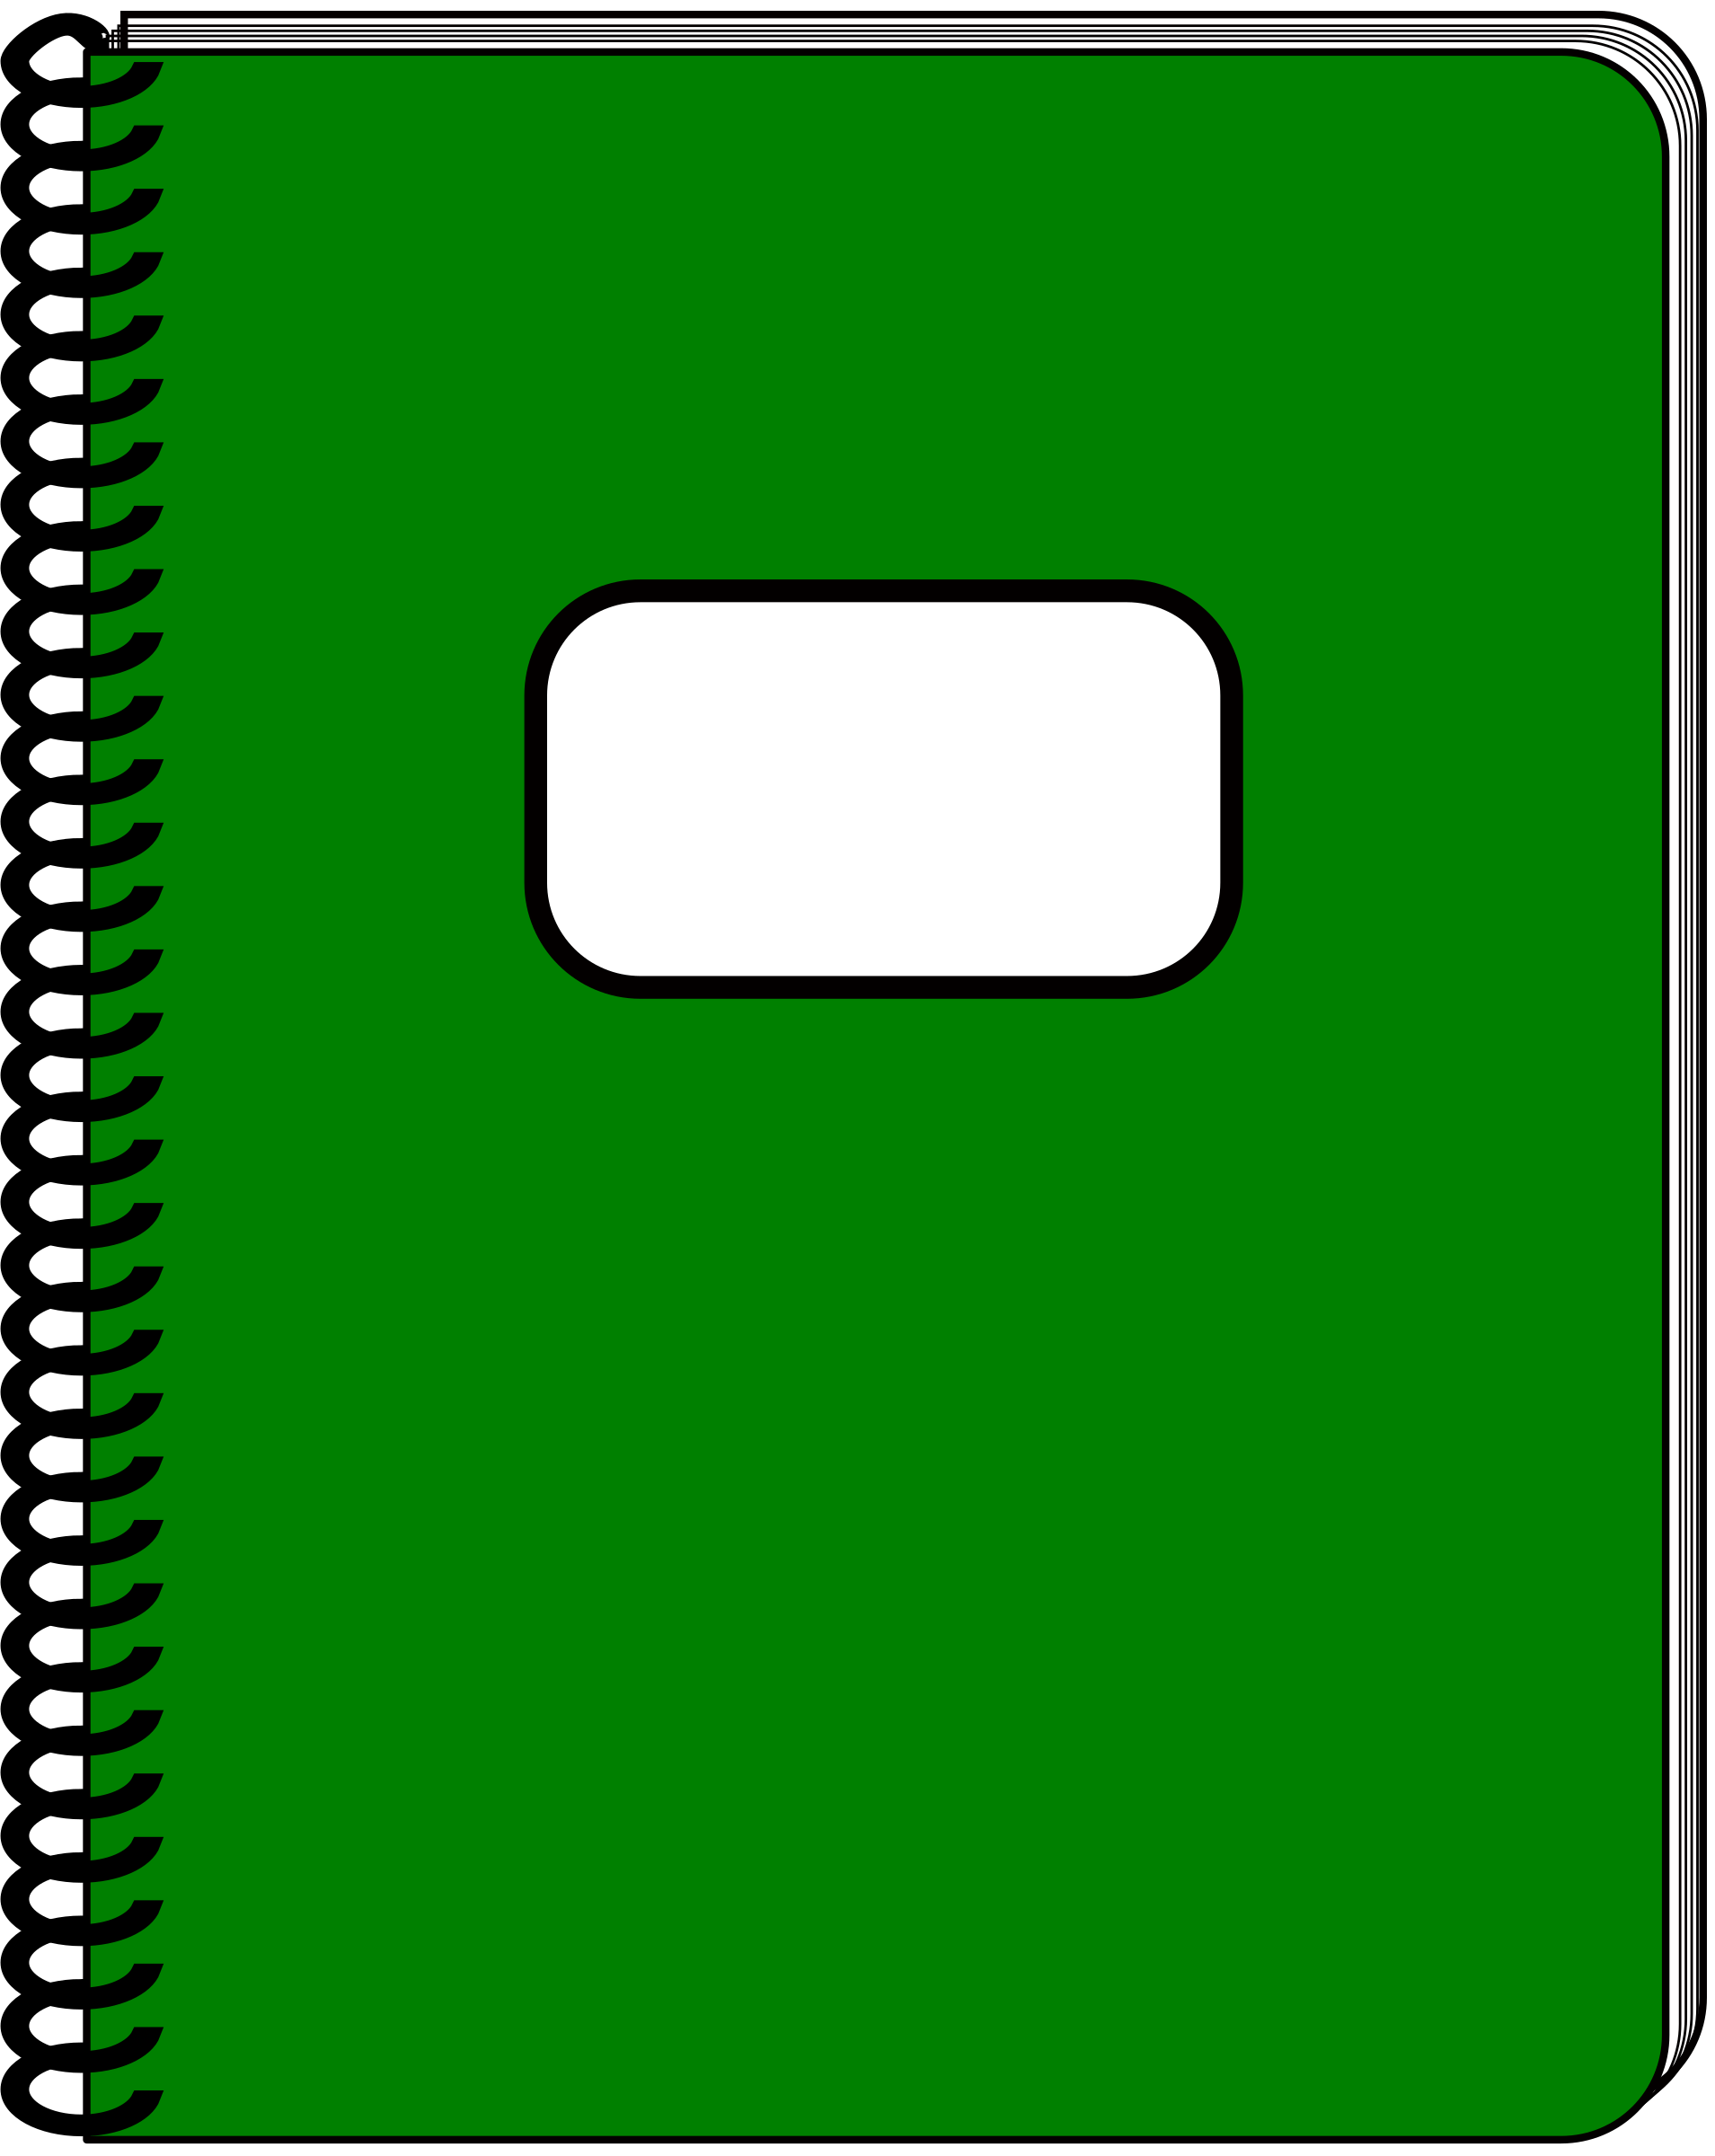 notebook clipart - photo #30